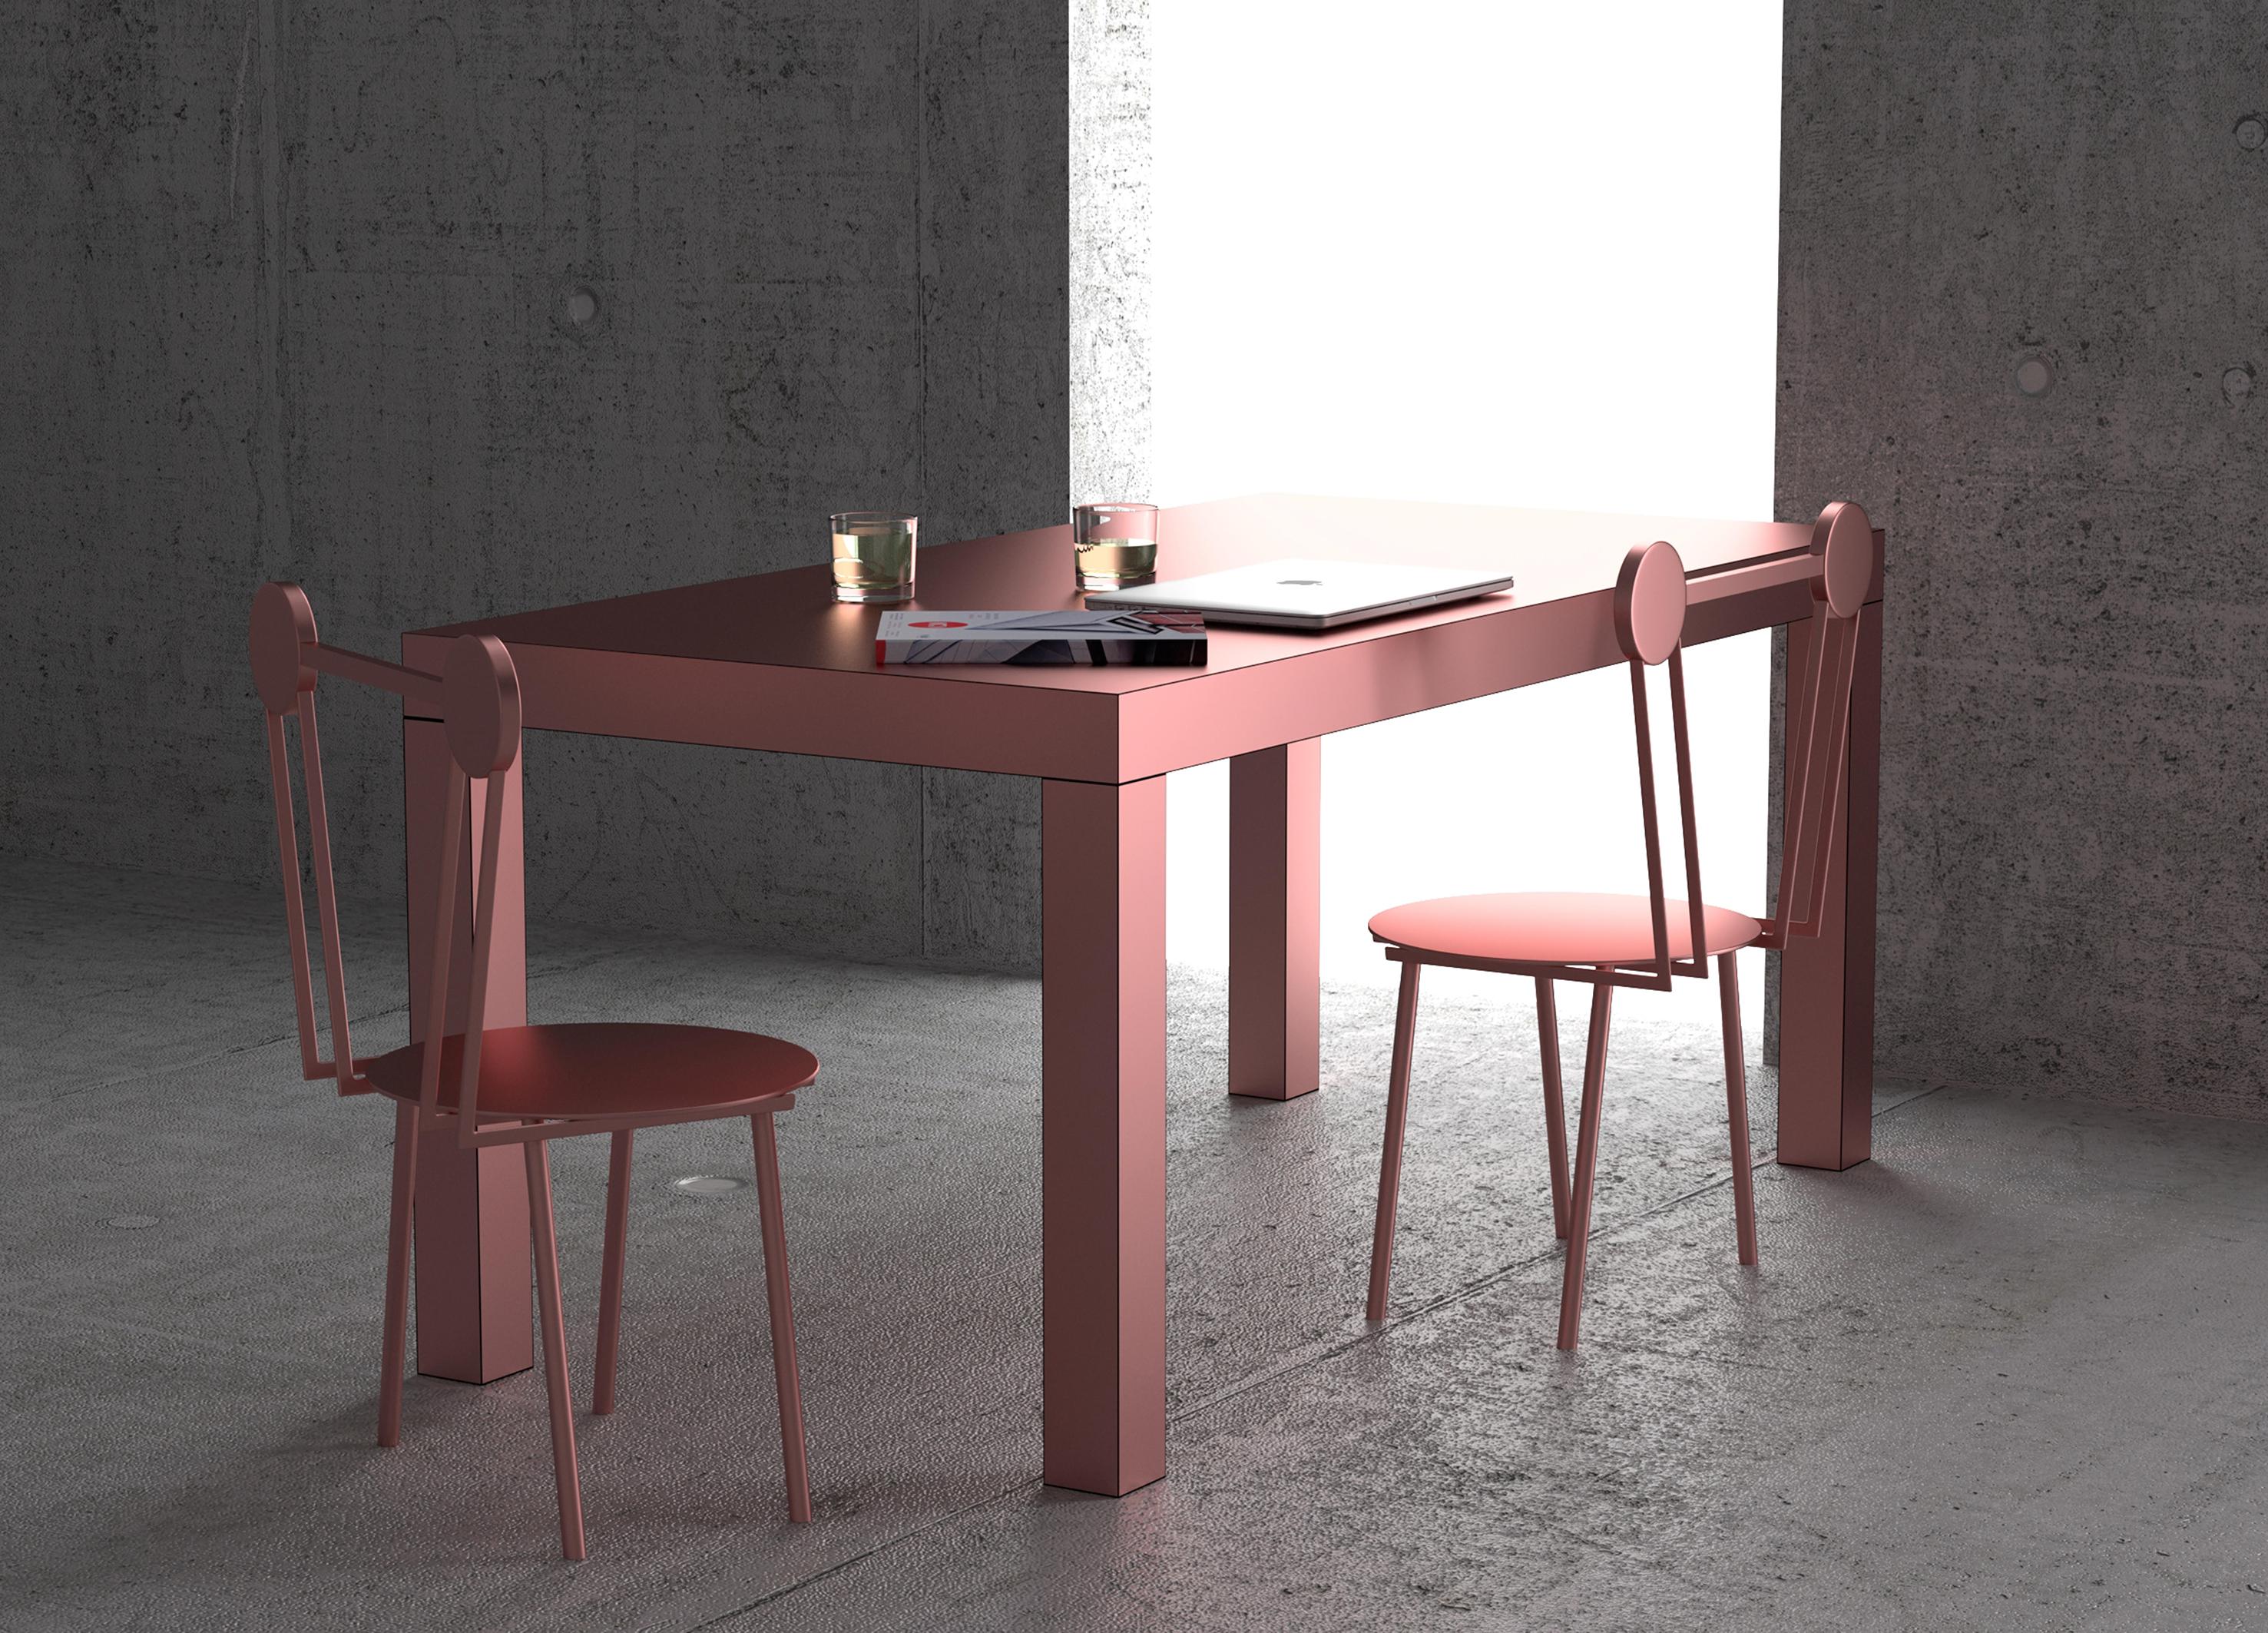 Hitan is a multifunctional table entirely covered by metal HPL Laminates.

Its Minimalist structure comprises a rectangular top supported by four square cross-section legs.
The manufacturing process and research on metal surfaces treatment and